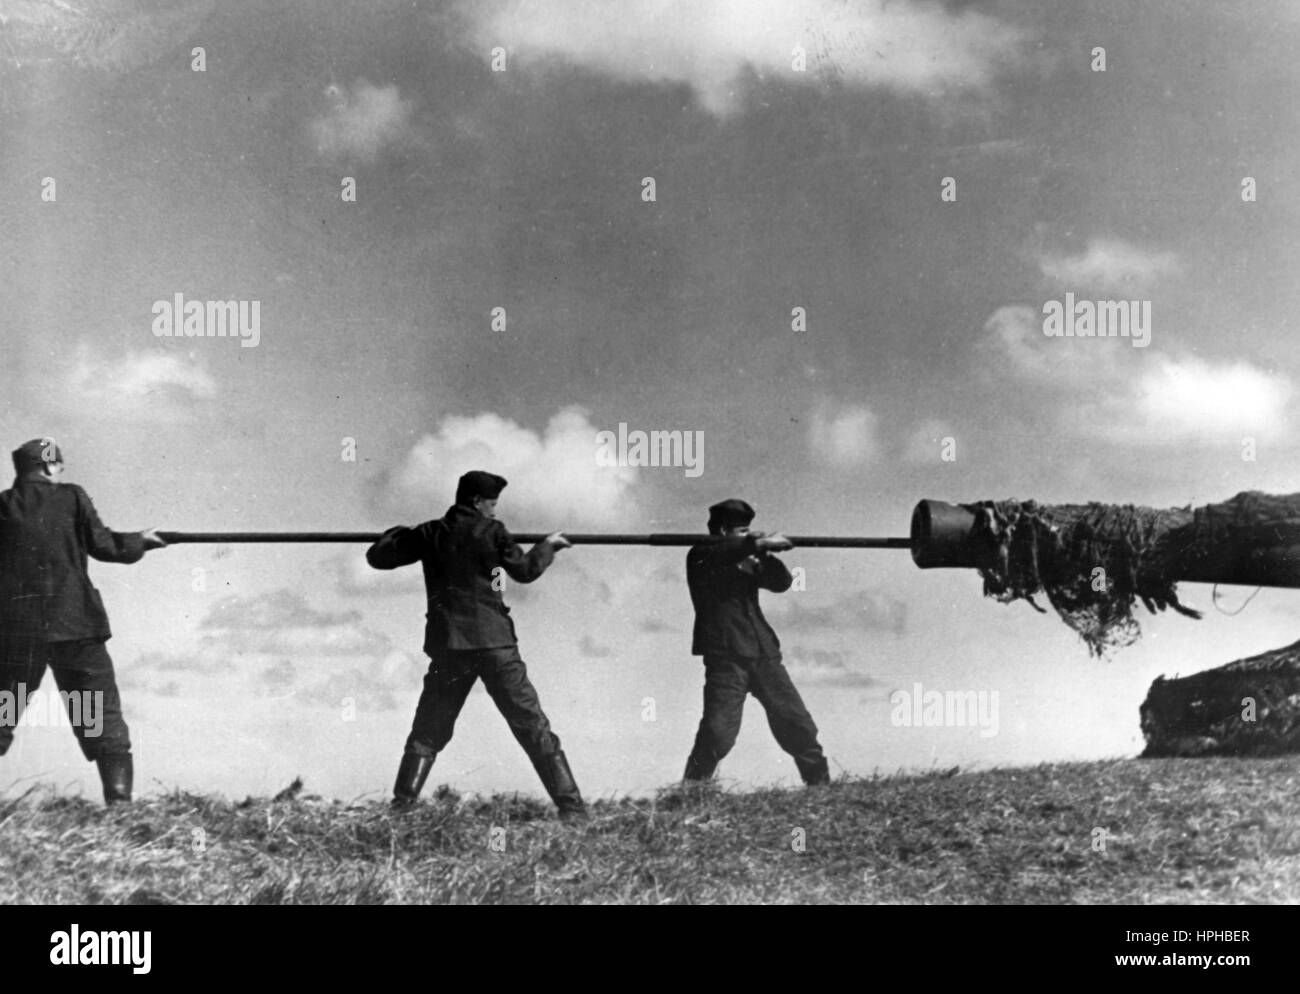 The Nazi propaganda image shows German Wehrmacht soldiers cleaning the barrel of a gun on the Channel Coast on the Western Front. Published in November 1940. Fotoarchiv für Zeitgeschichte - NOT FOR WIRE SERVICE - | usage worldwide Stock Photo